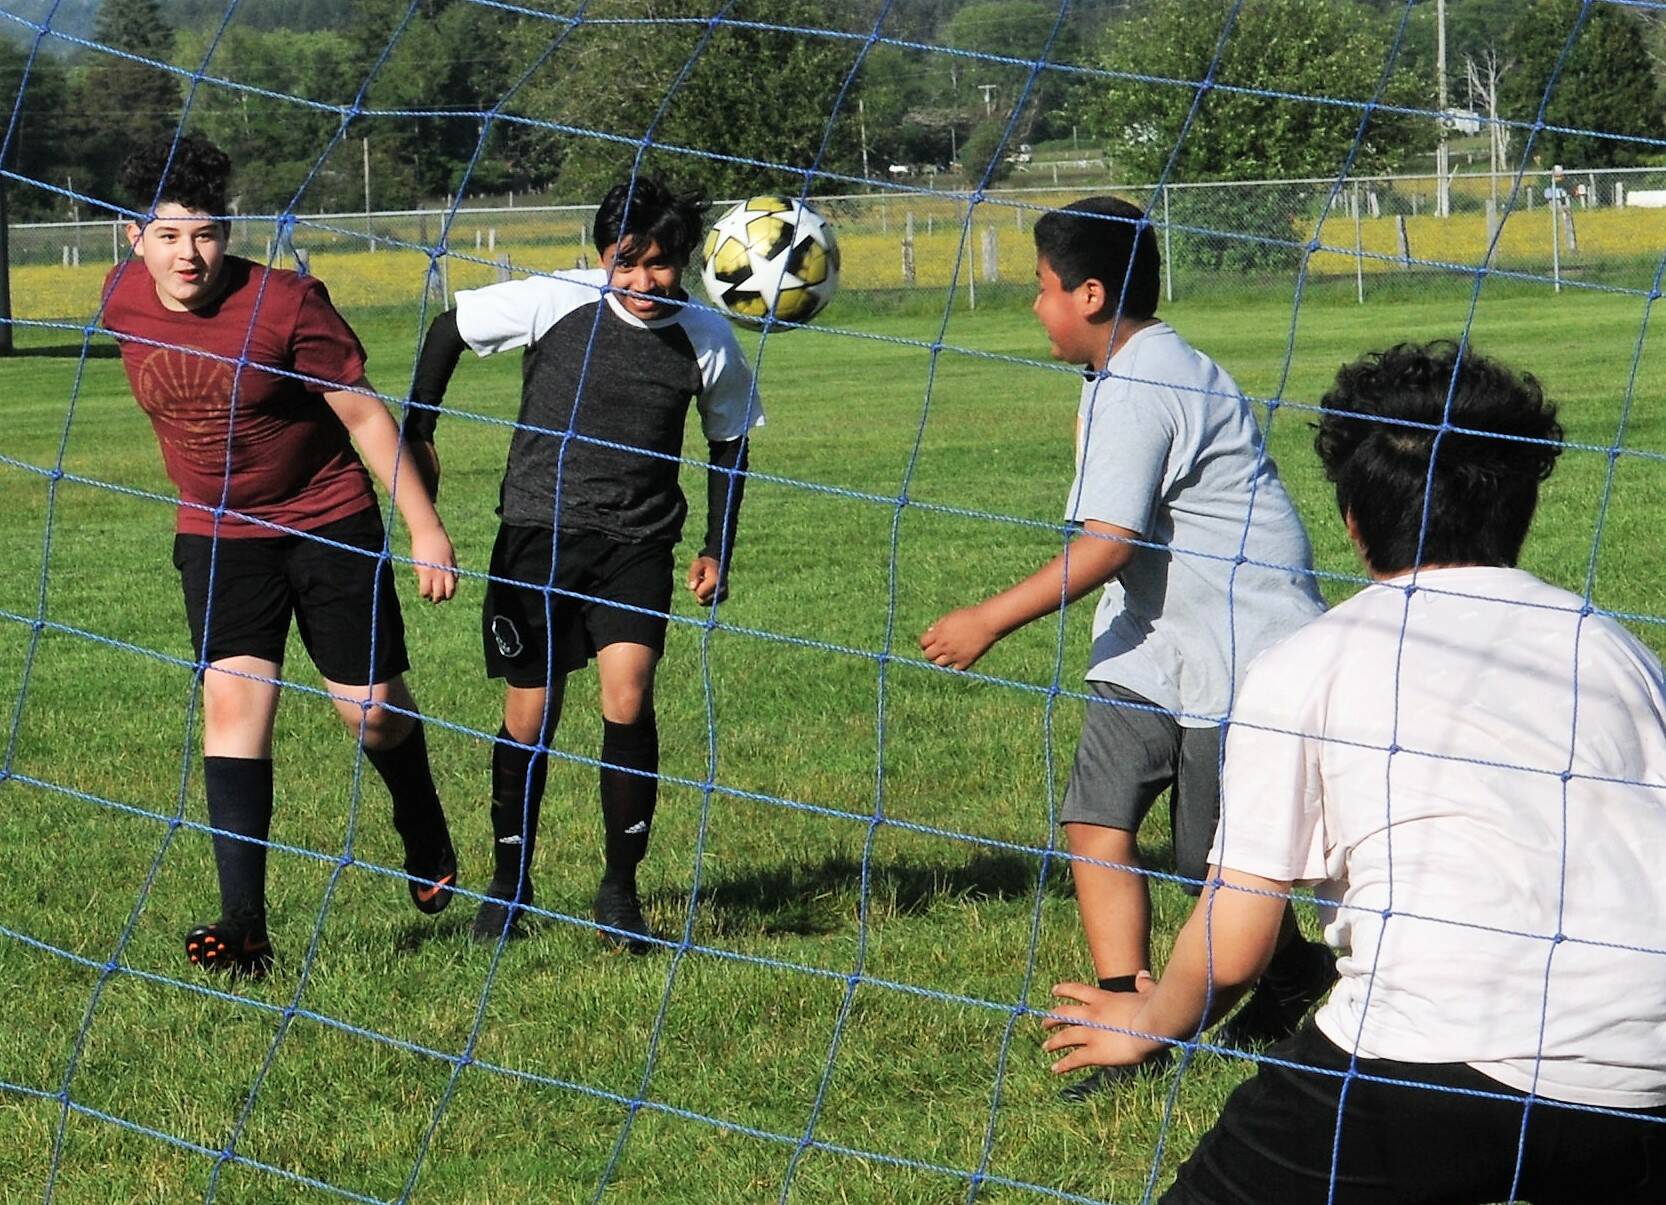 Not to be confused with the Red Dragons, the 10 to 14-year-old Dragons were having fun in the sun as they prepared for the soccer season. Photo by Lonnie Archibald.